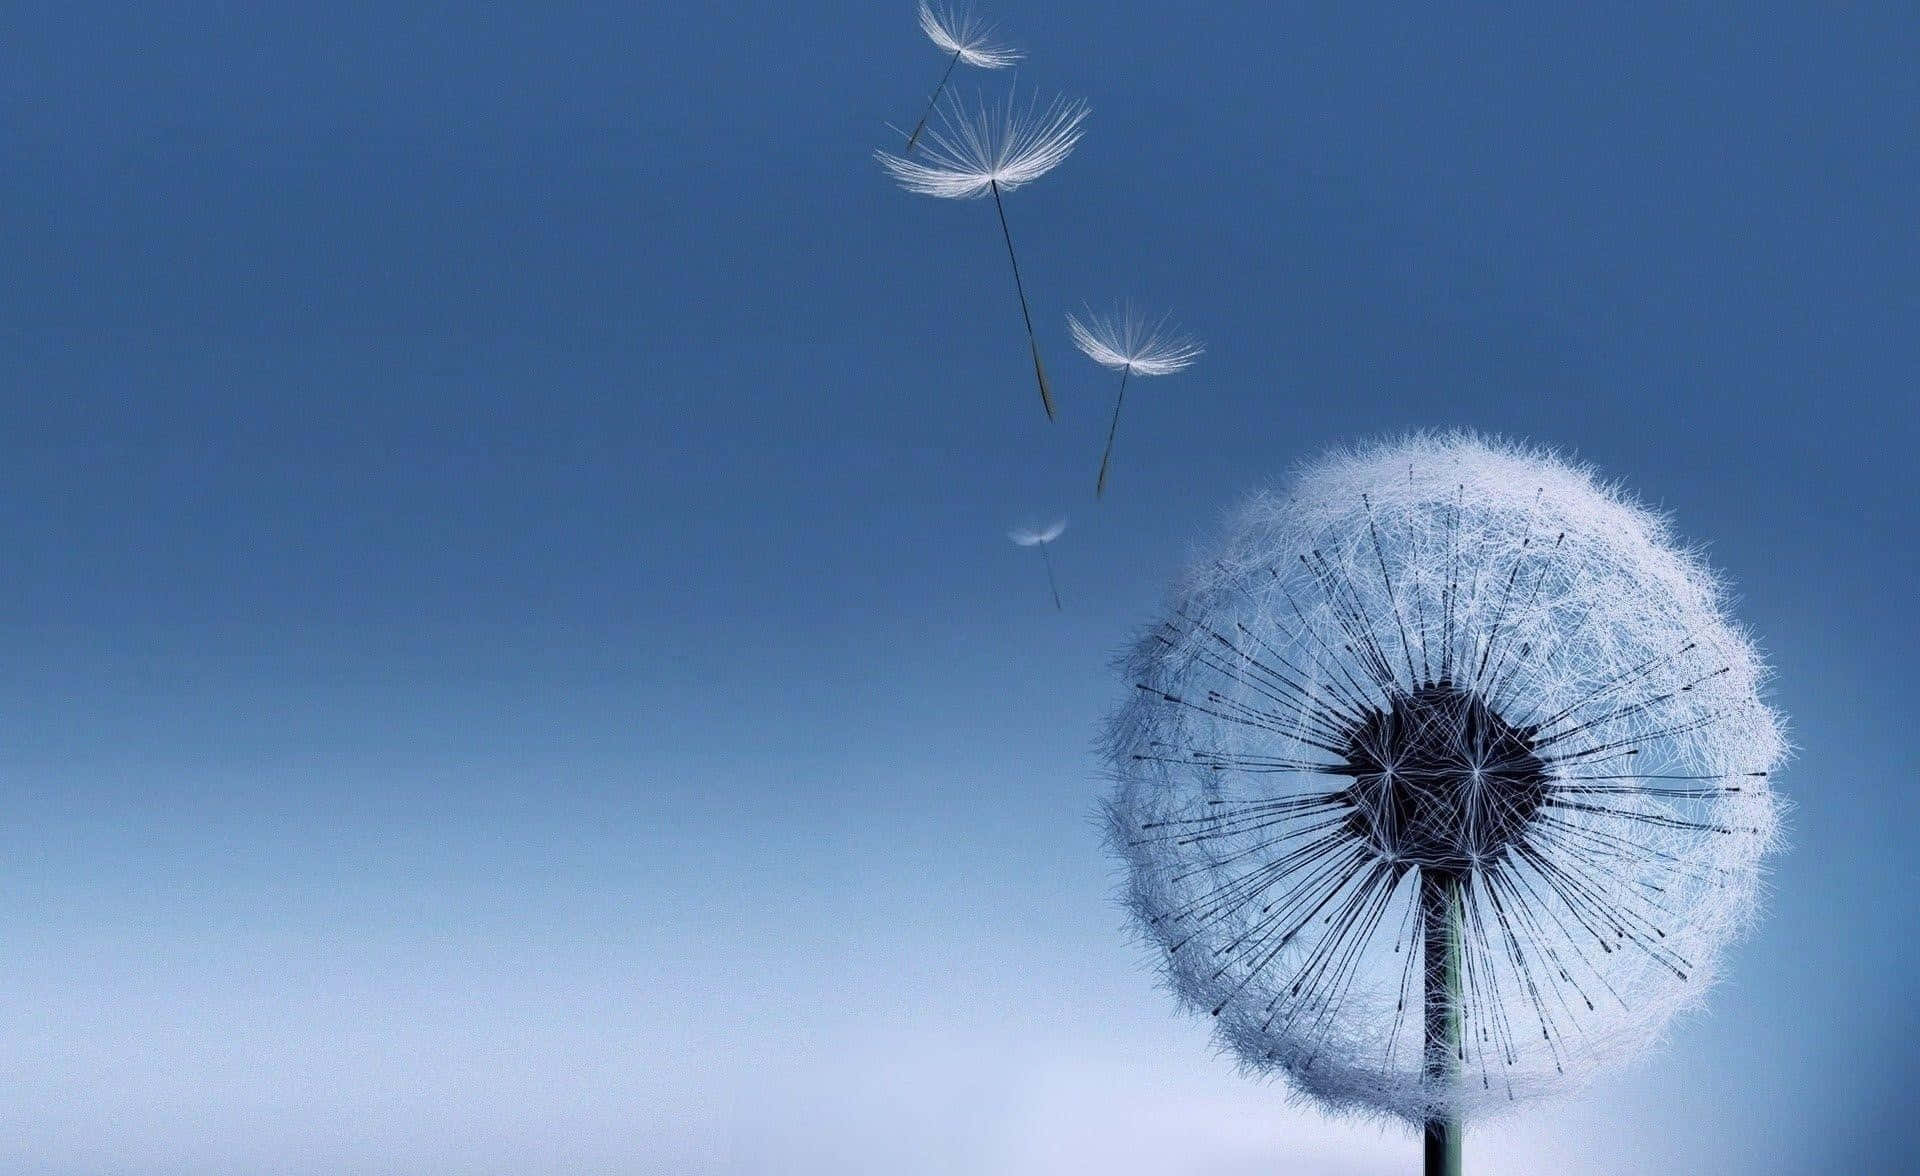 A close up of the beauty of a dandelion